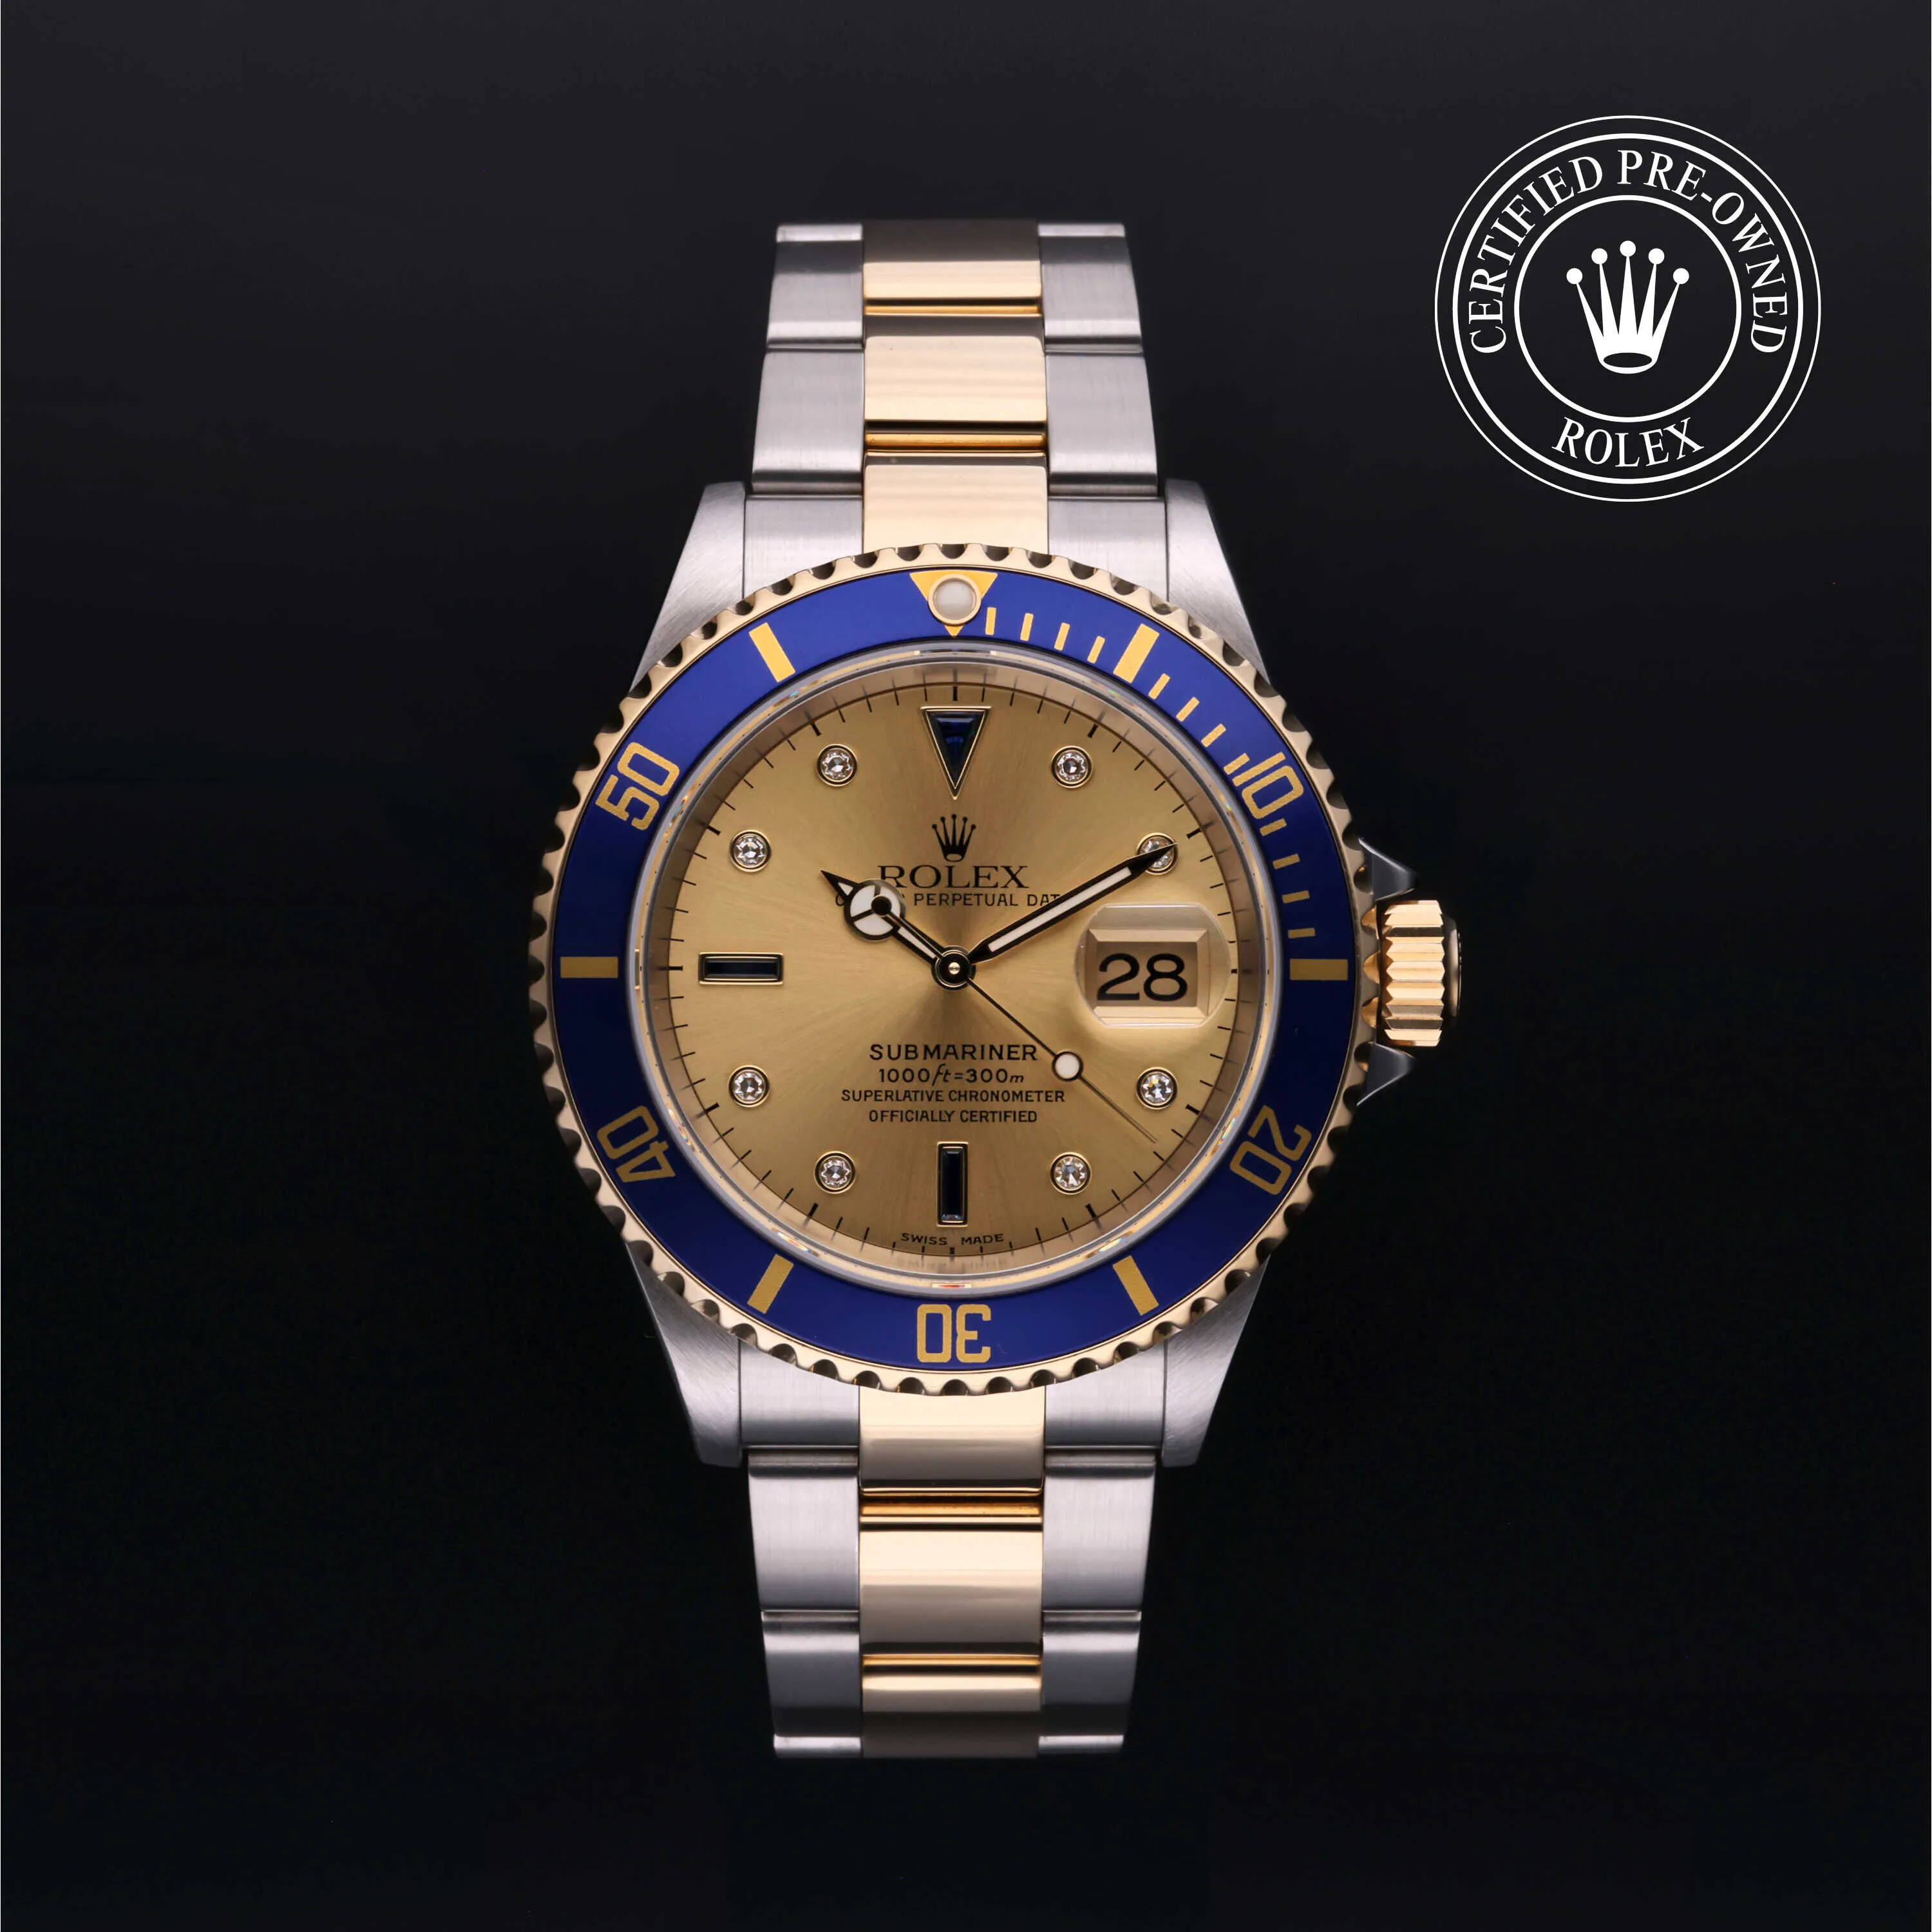 Rolex Submariner 40mm Yellow gold and stainless steel Champagne